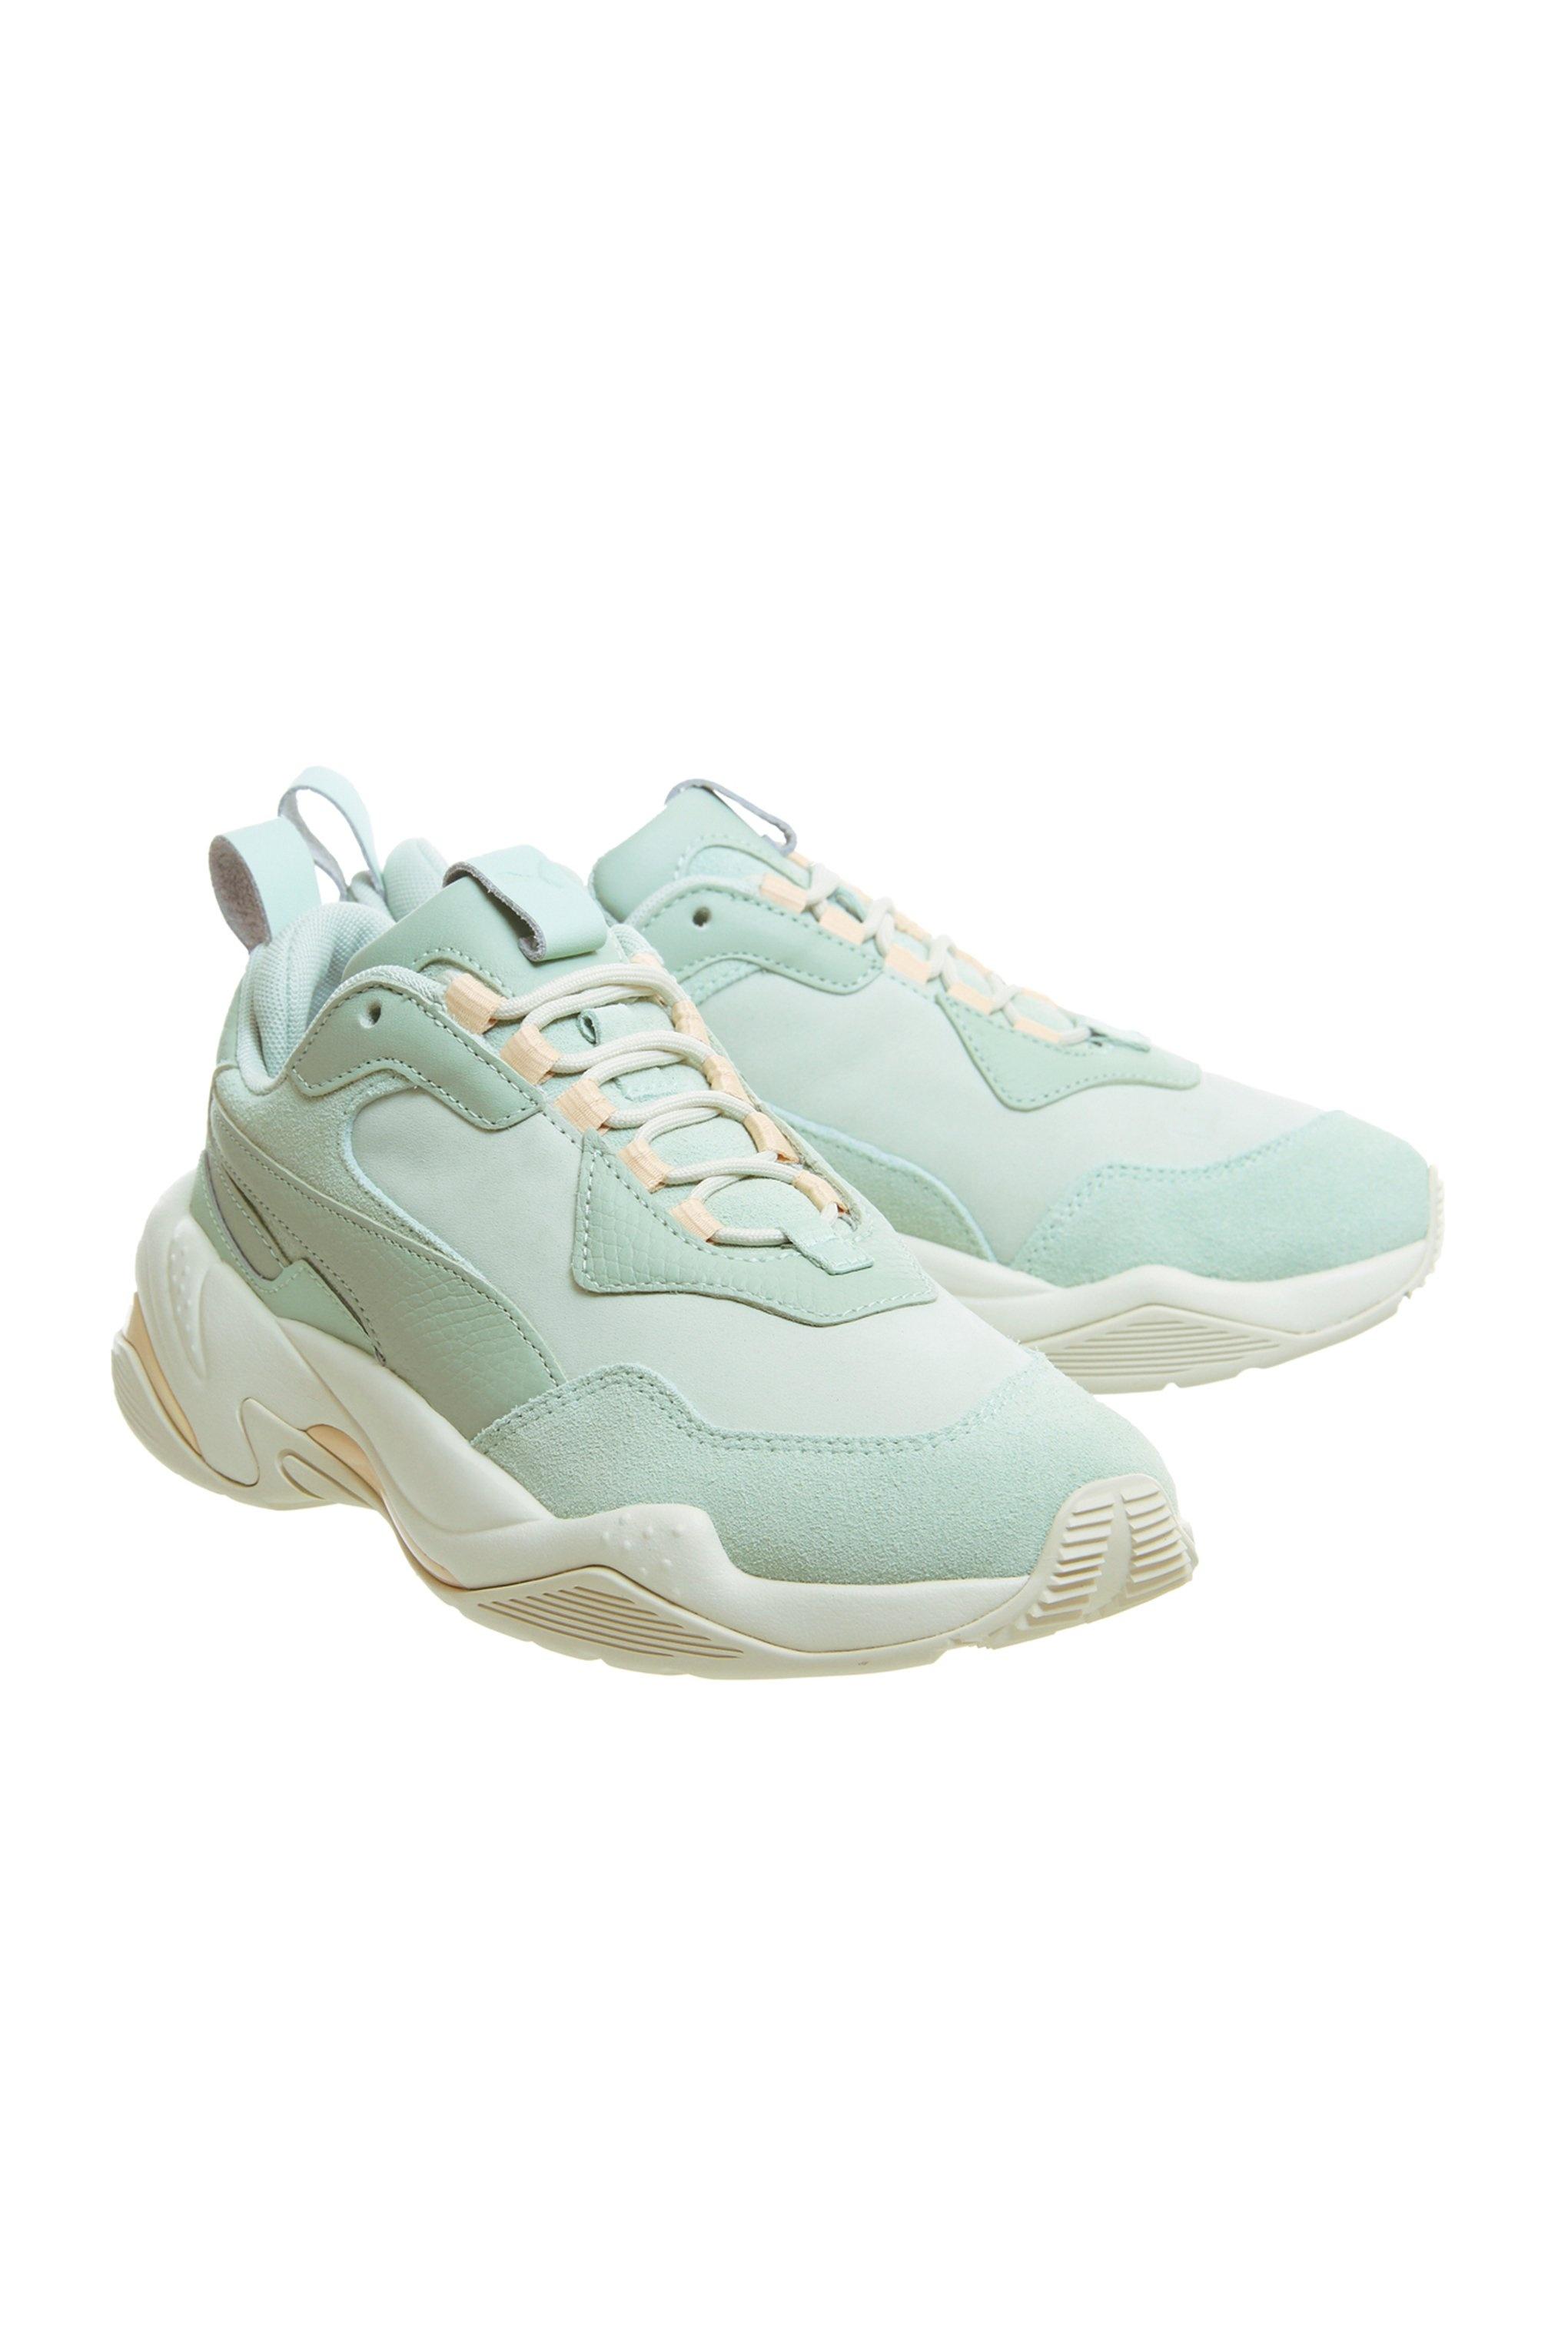 PUMA Leather Thunder Desert Trainers By 